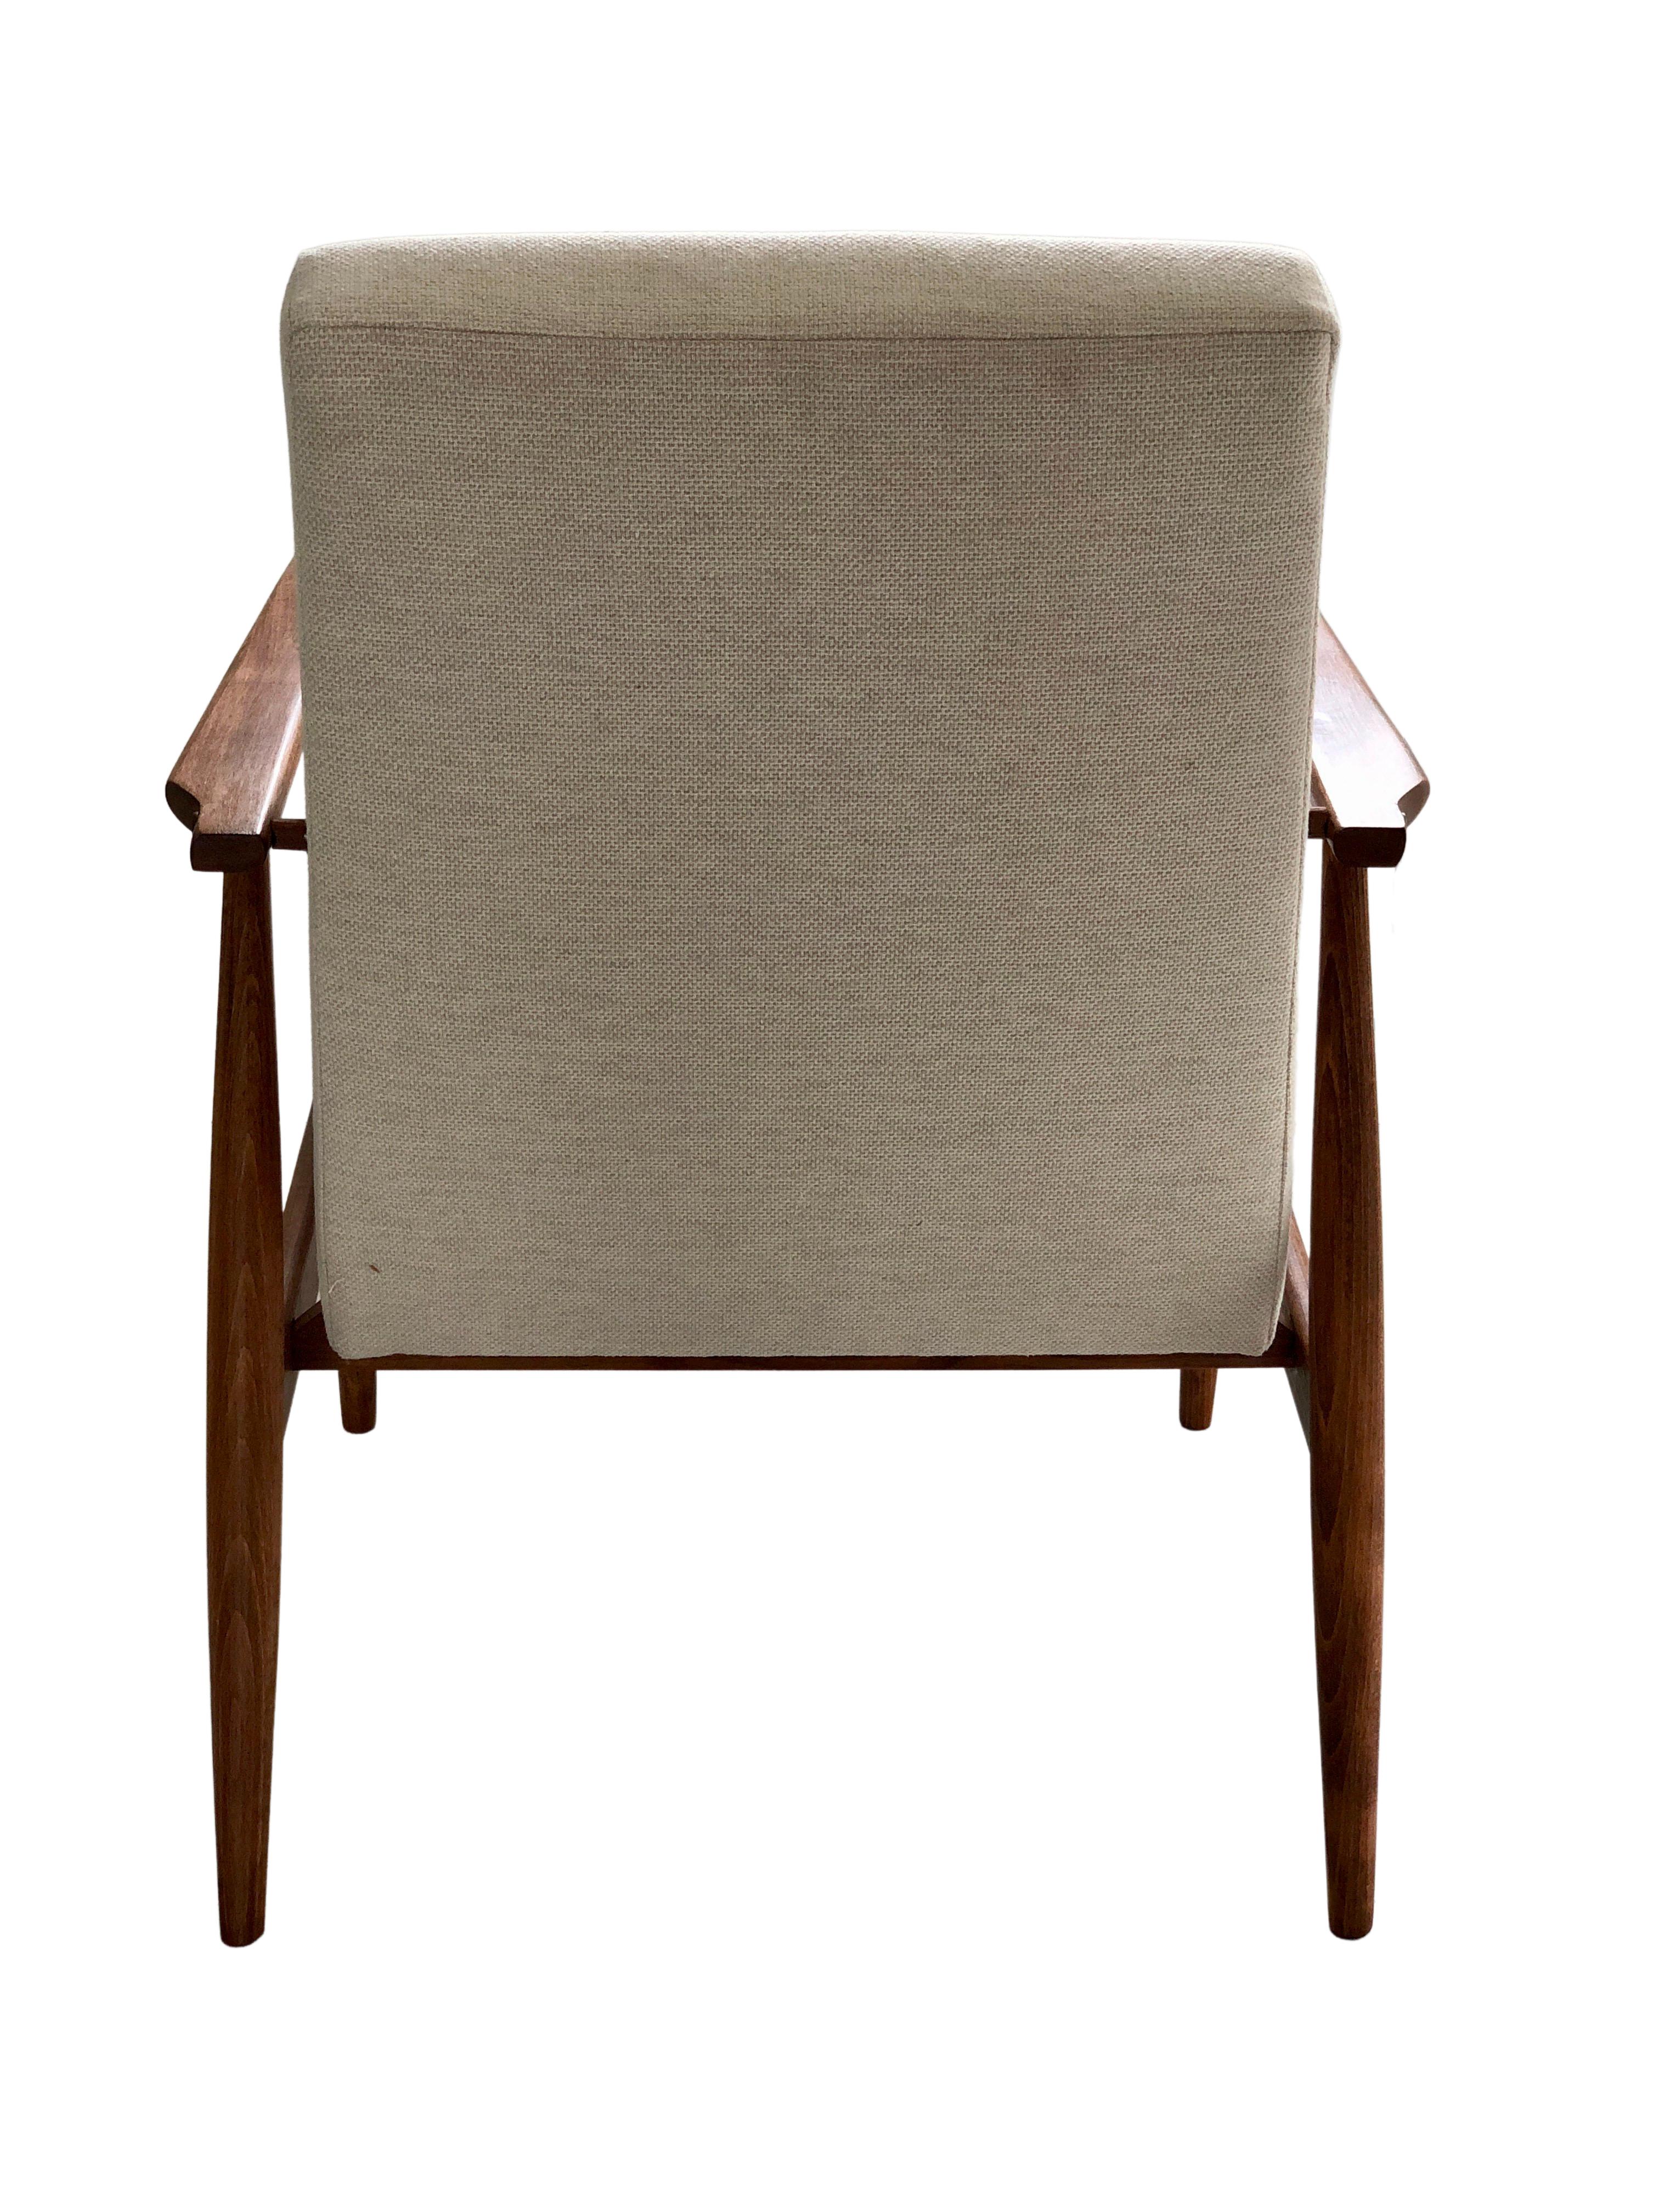 Hand-Crafted Mid Century Armchair by Henryk Lis in Beige, Europe, 1960s, For Sale